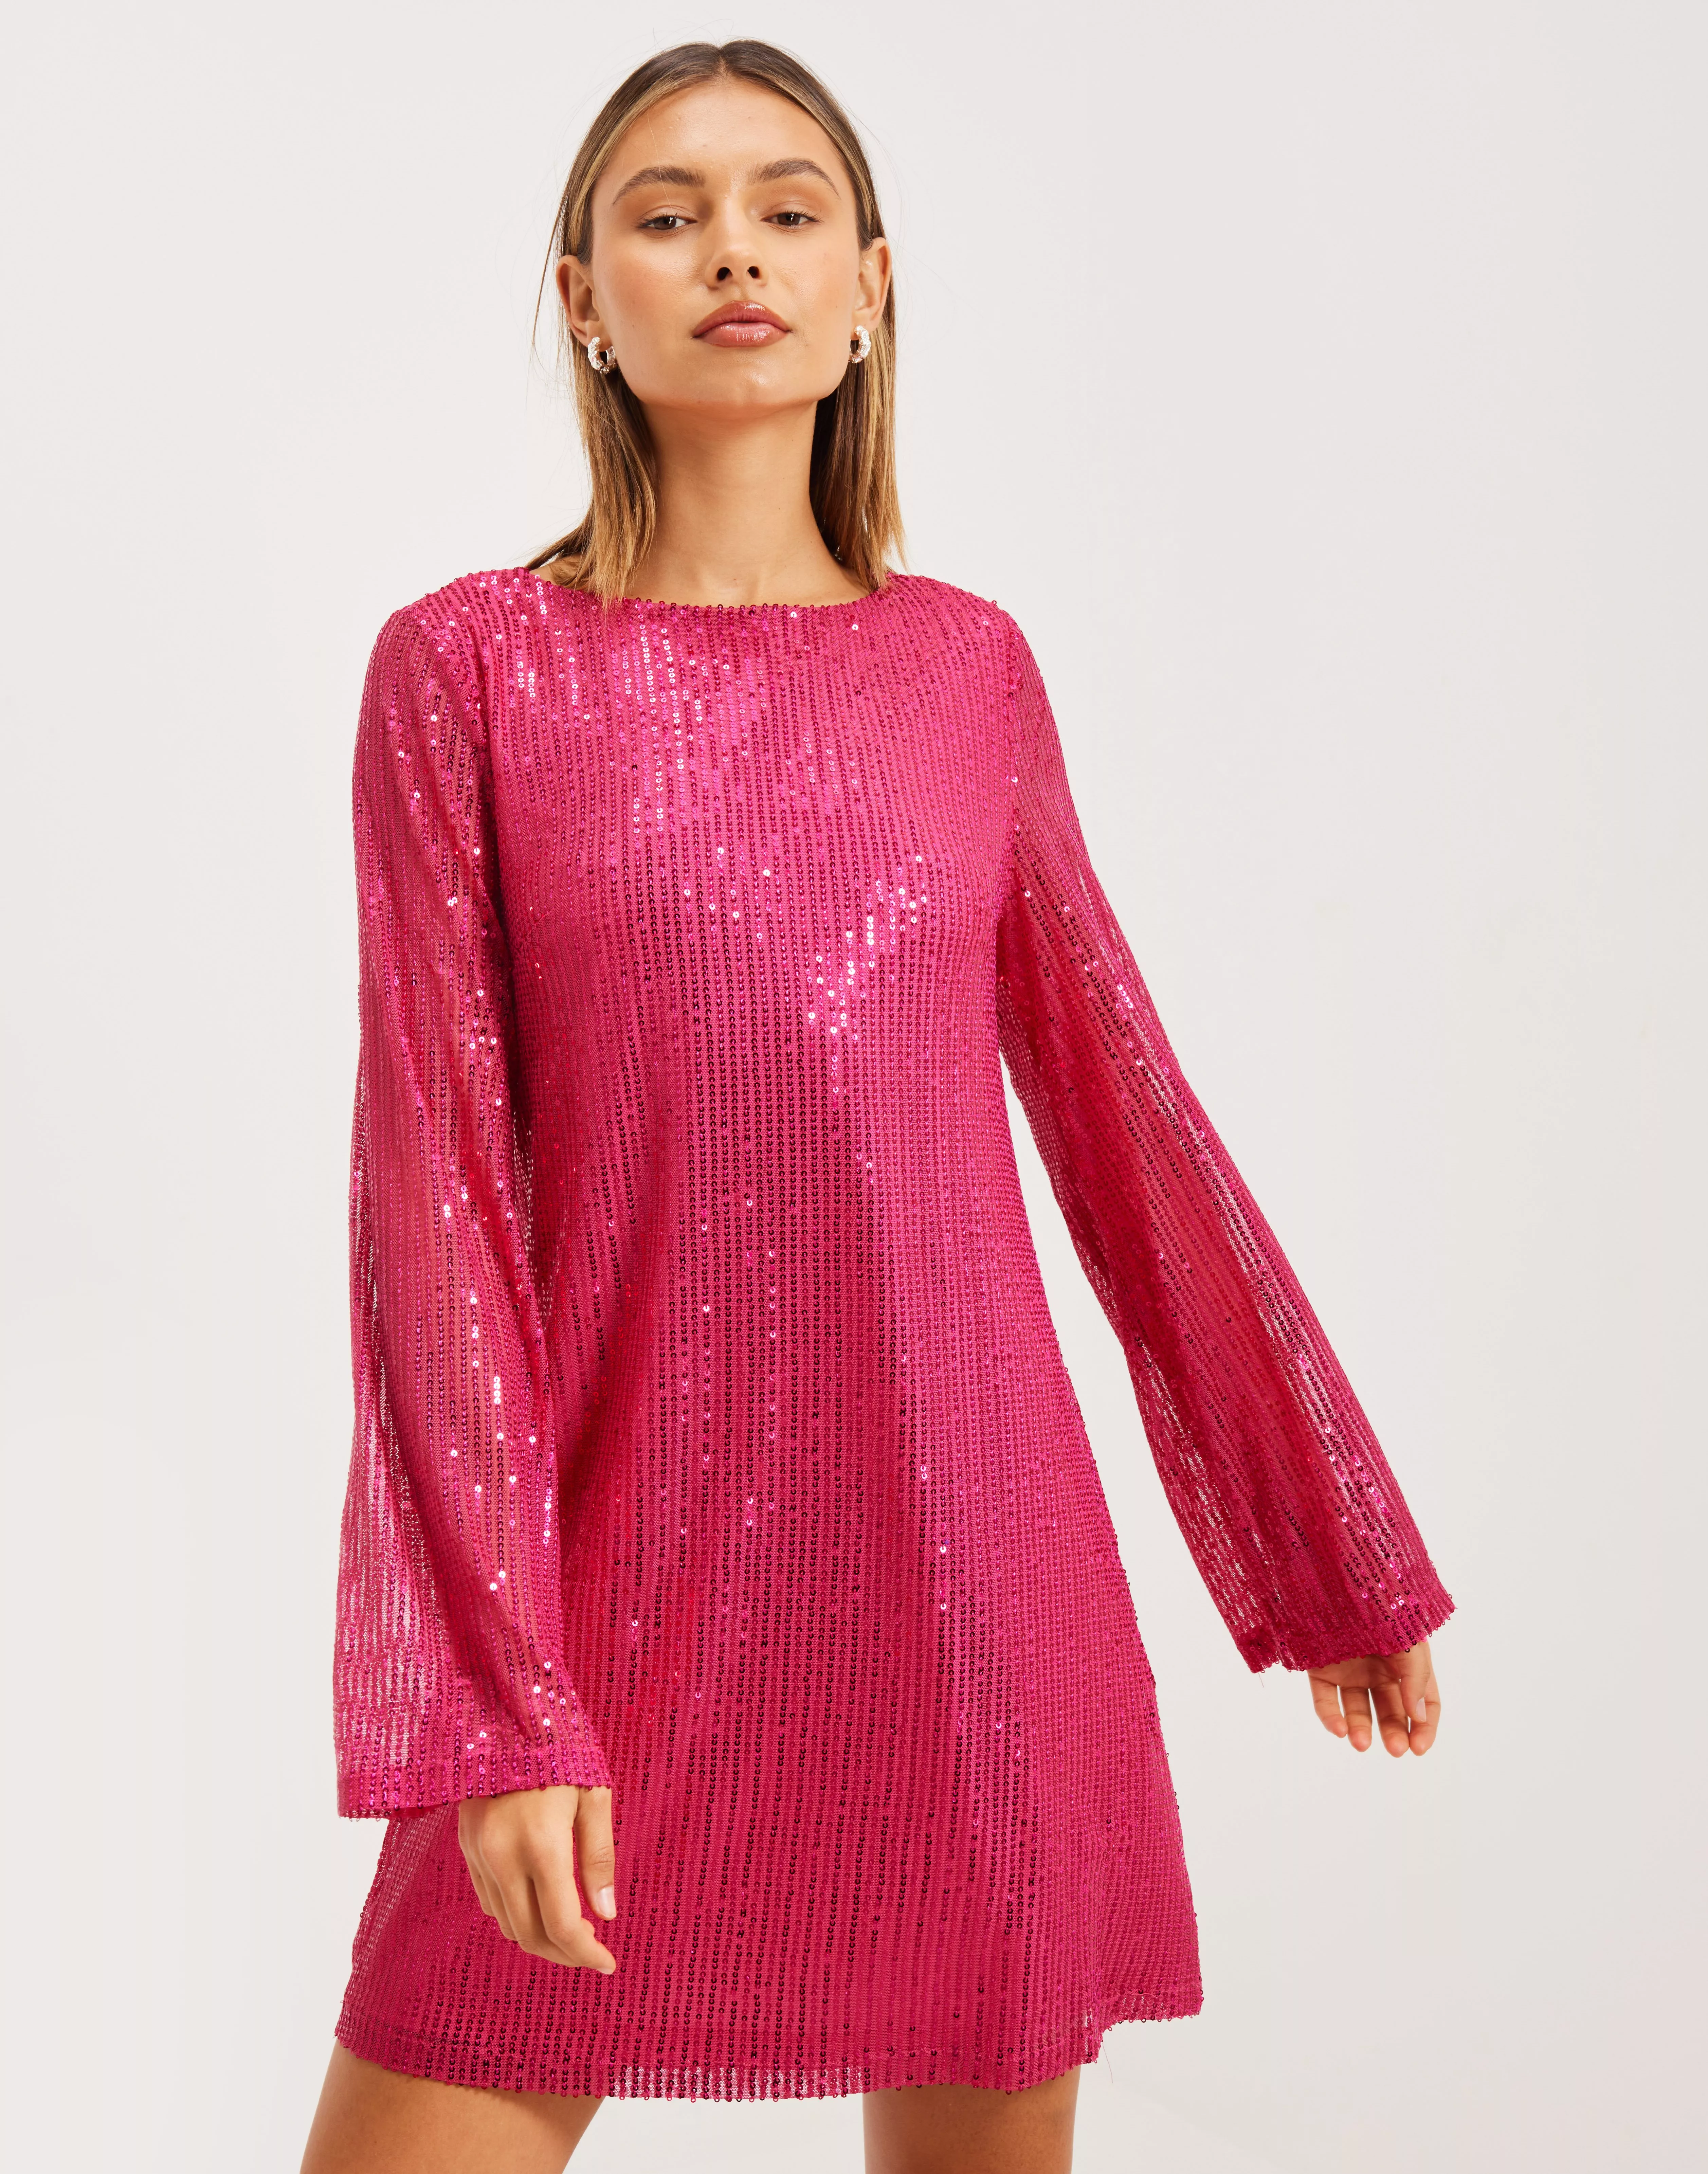 Staple Faciliteter opkald Buy Glamorous Nelly x Glamorous Long Sleeve Sequin Dress - Hot Pink | Nelly .com